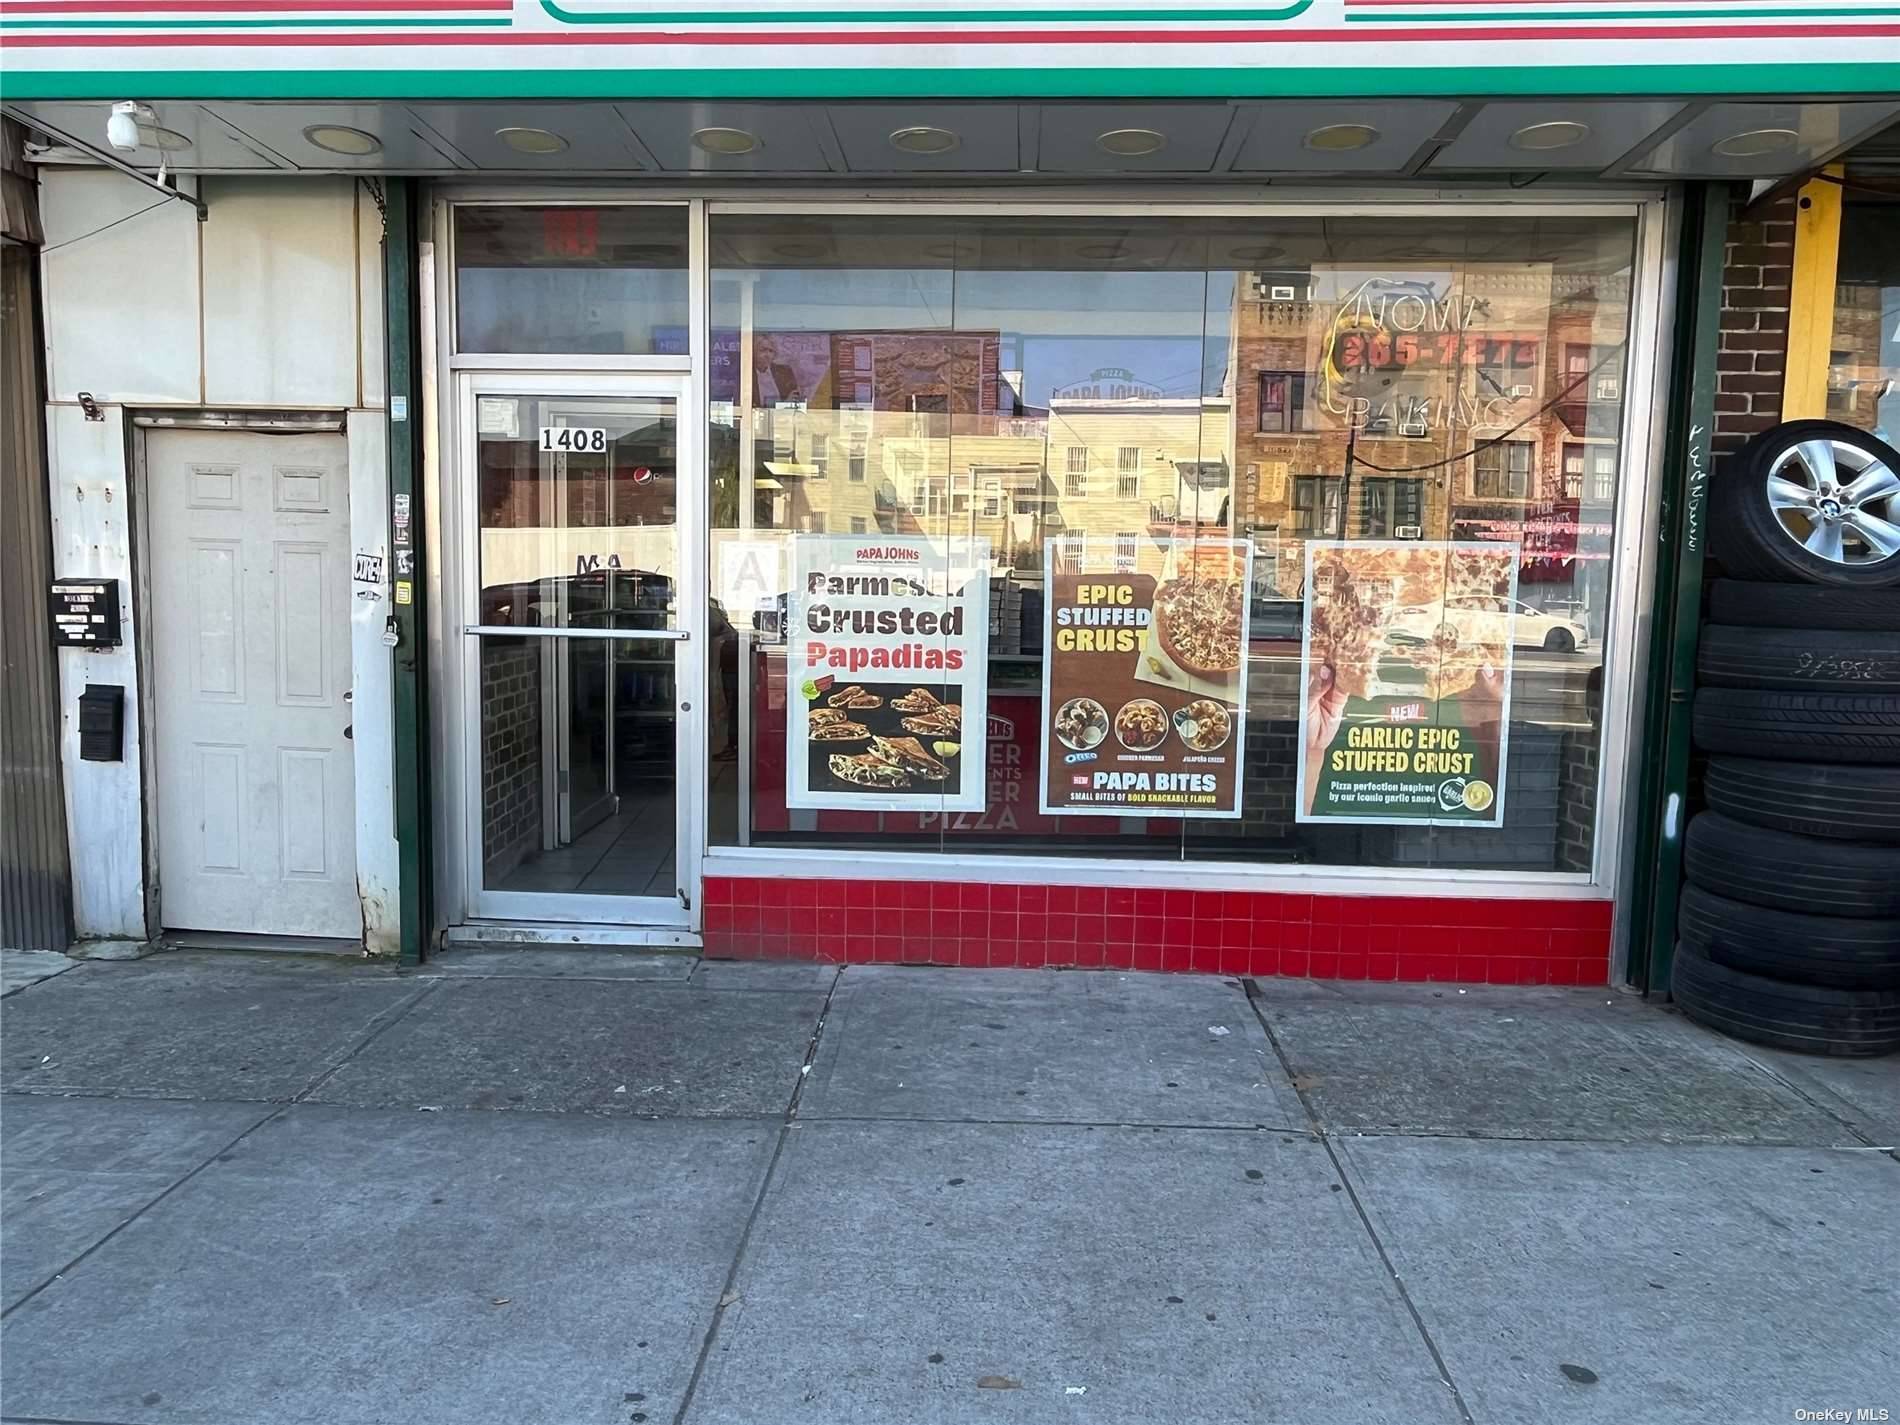 10 years business for sale now used as pizza store, Franchise is nor for sale, goodwill for sale can be used as Deli, grocery, Restaurant